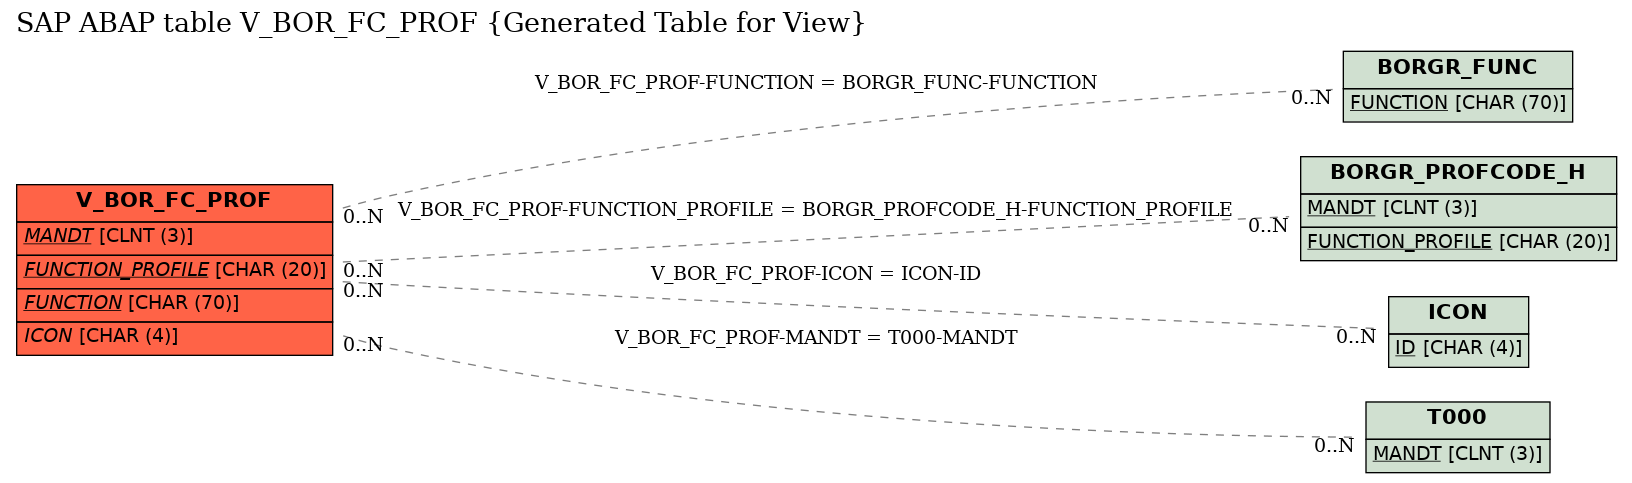 E-R Diagram for table V_BOR_FC_PROF (Generated Table for View)